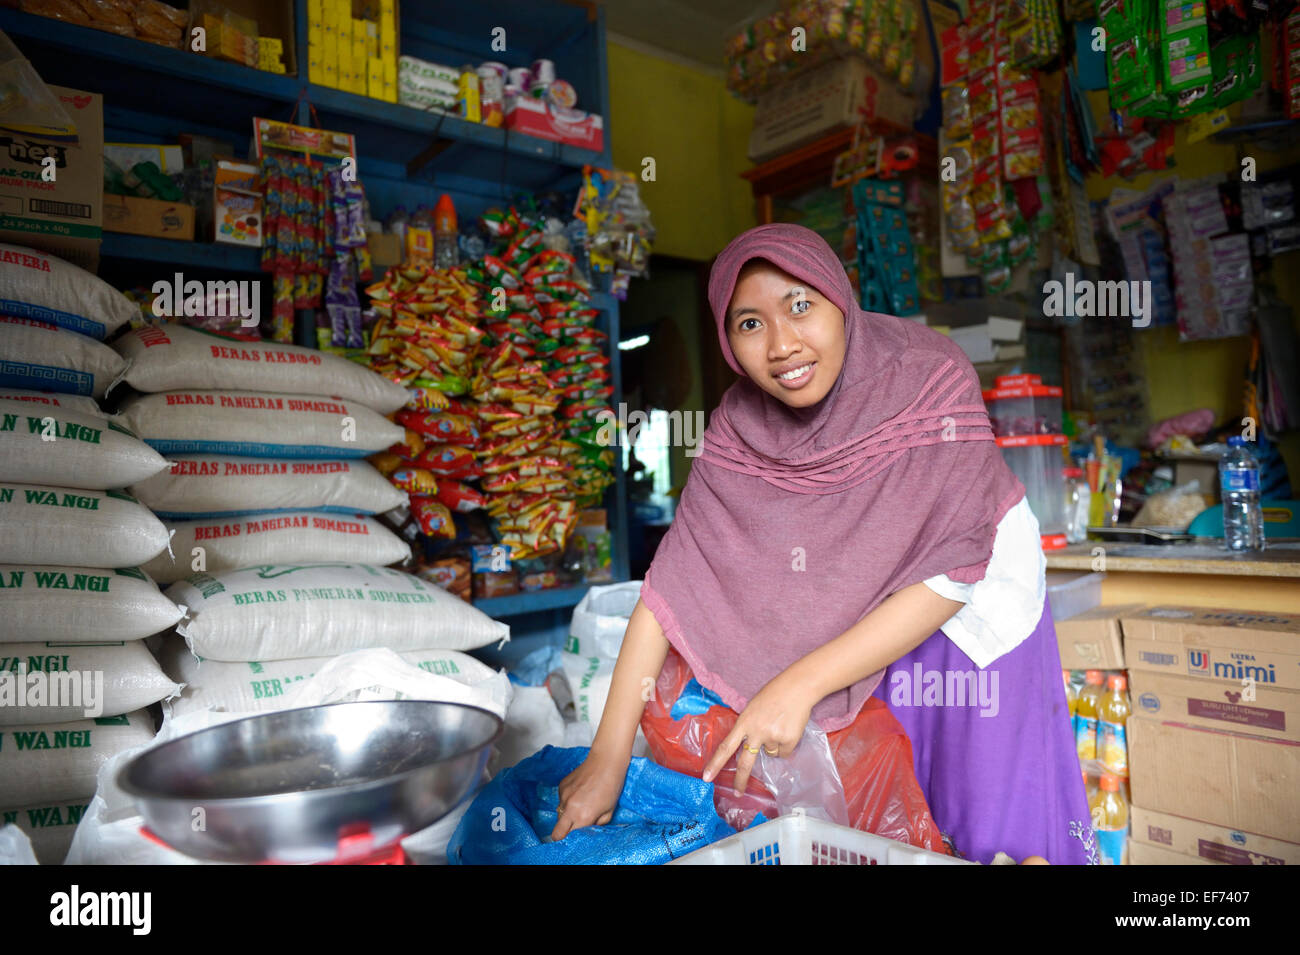 Young woman with veil, assistant in a small grocery store, Lam Rukam, Subdistrict Rozma, Aceh, Indonesia Stock Photo